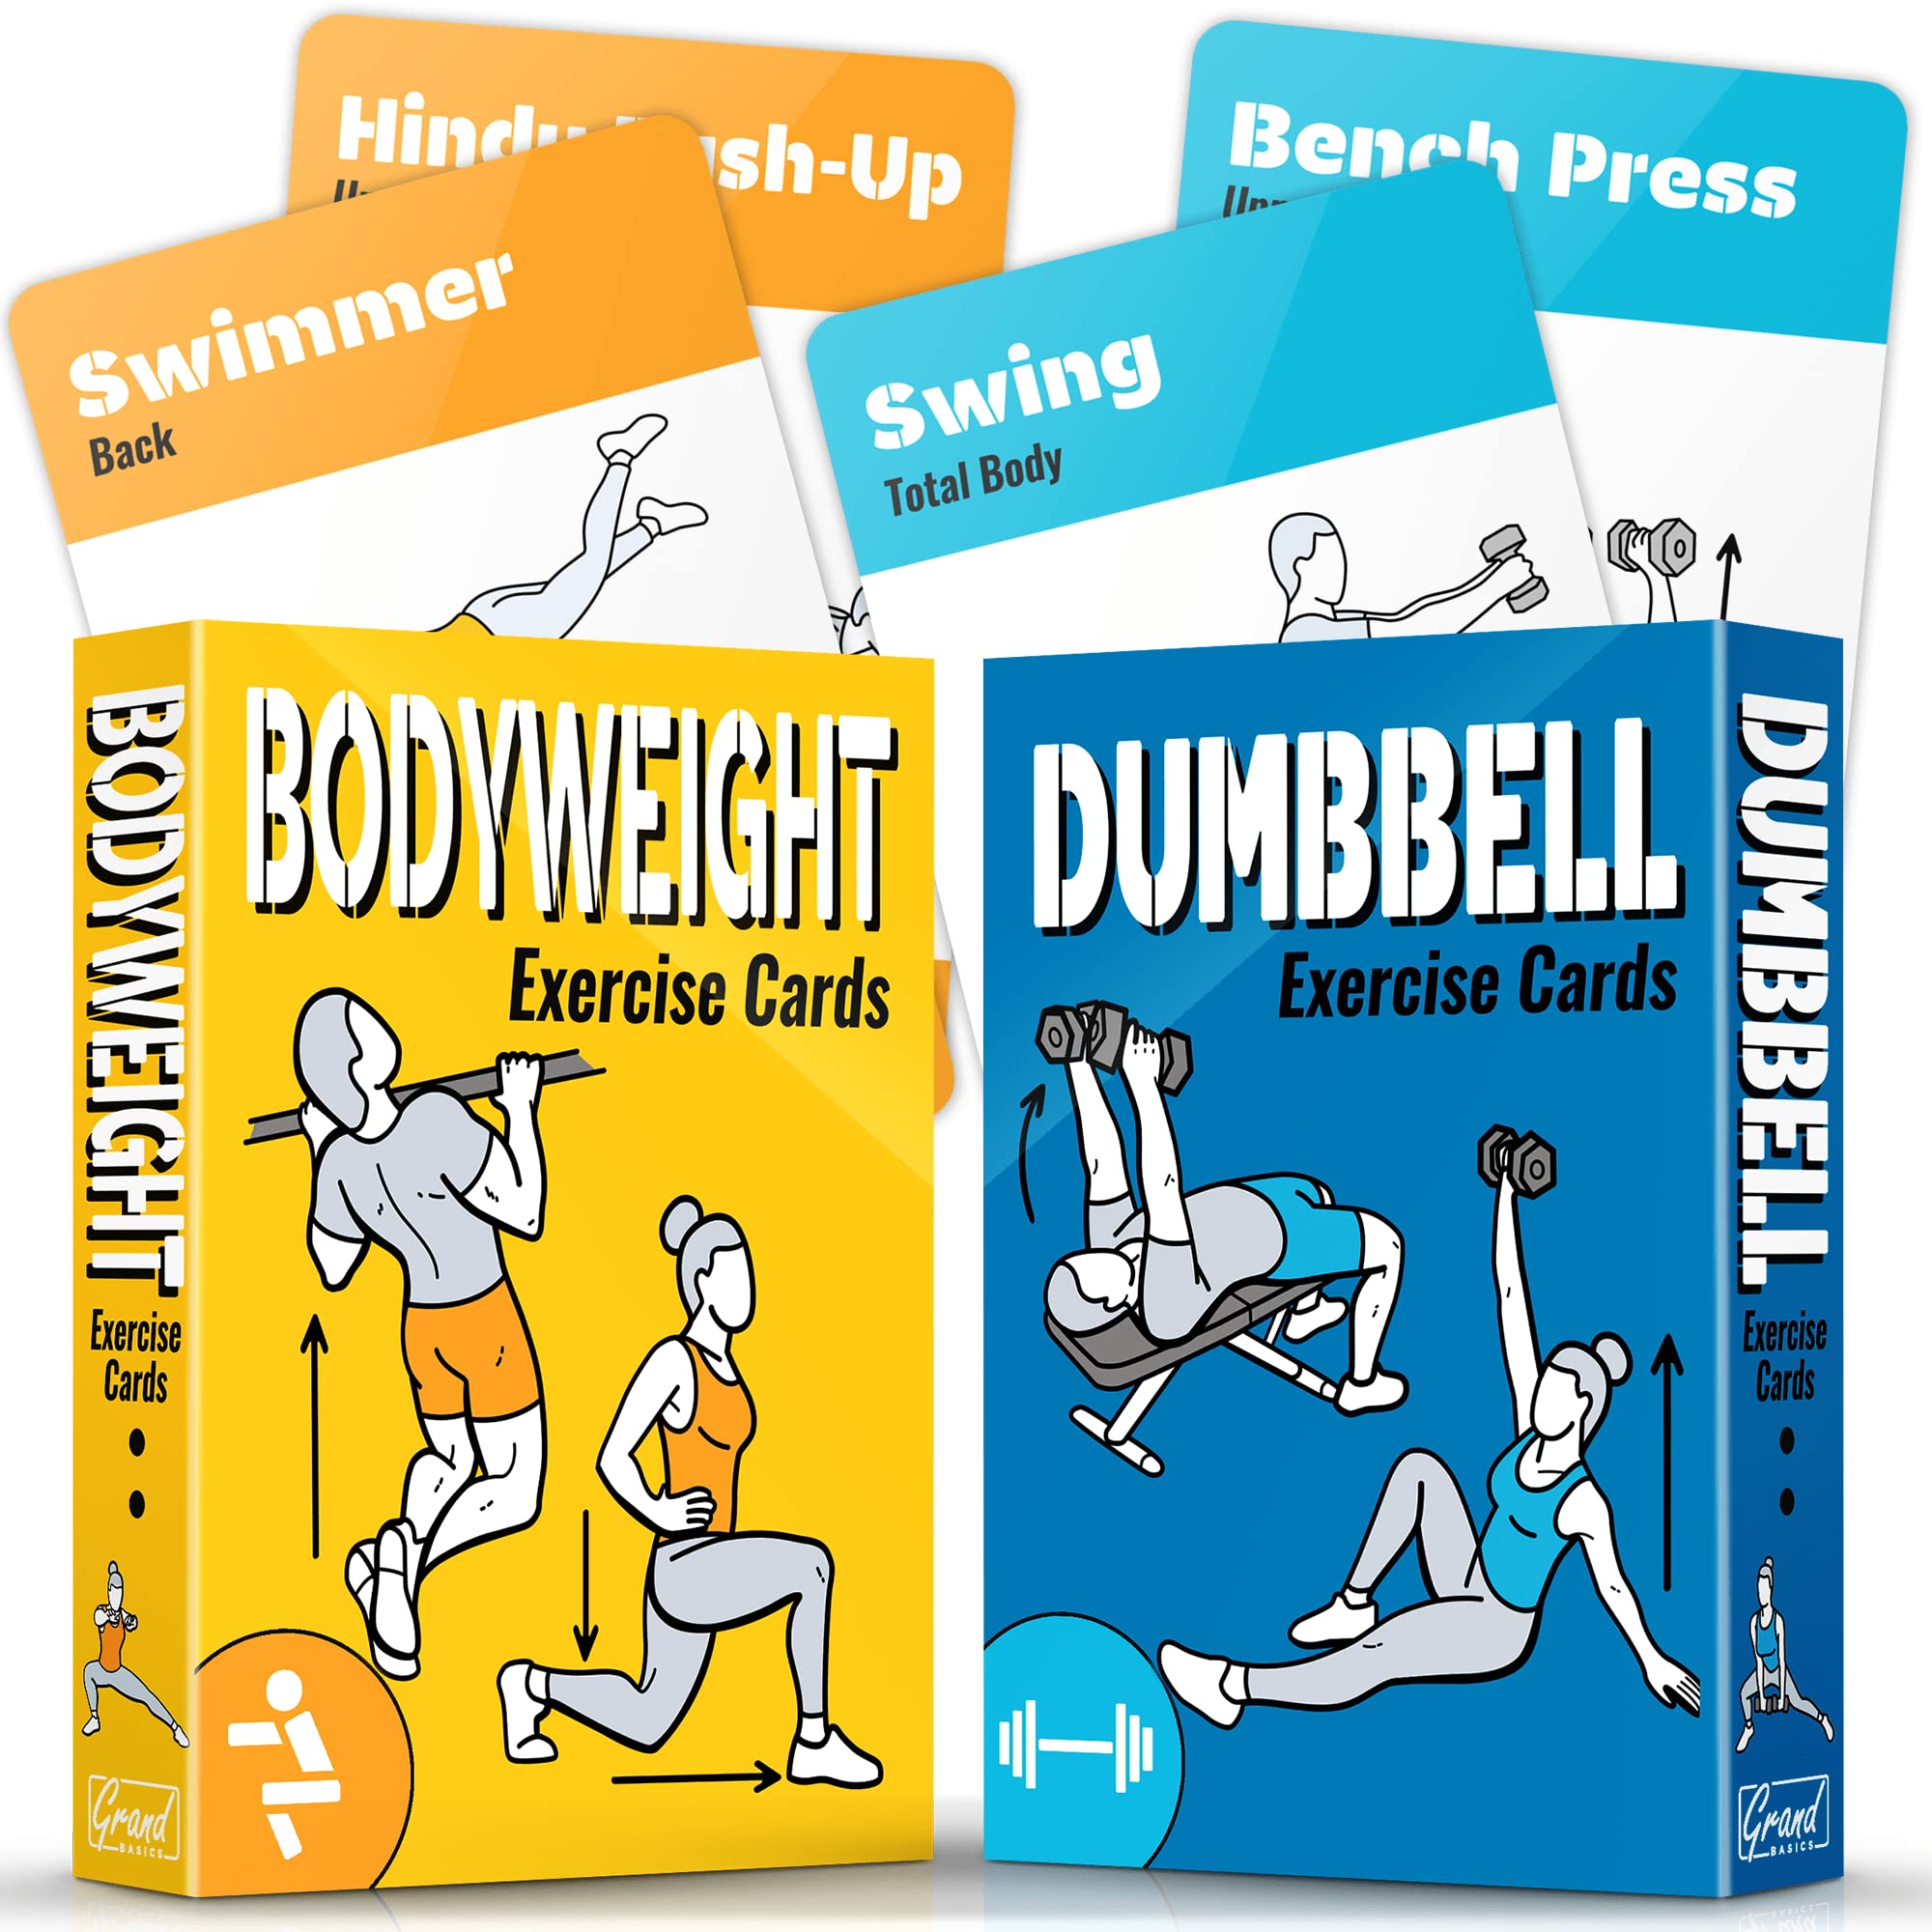 [2-PACK] Bodyweight & Dumbbell Workout Cards - Large Size 5" x 3.5" Exercise Cards Deck with 100 Different Exercises, Perfect for Circuit Training & Weightlifting - Fitness Cards for Women & Men